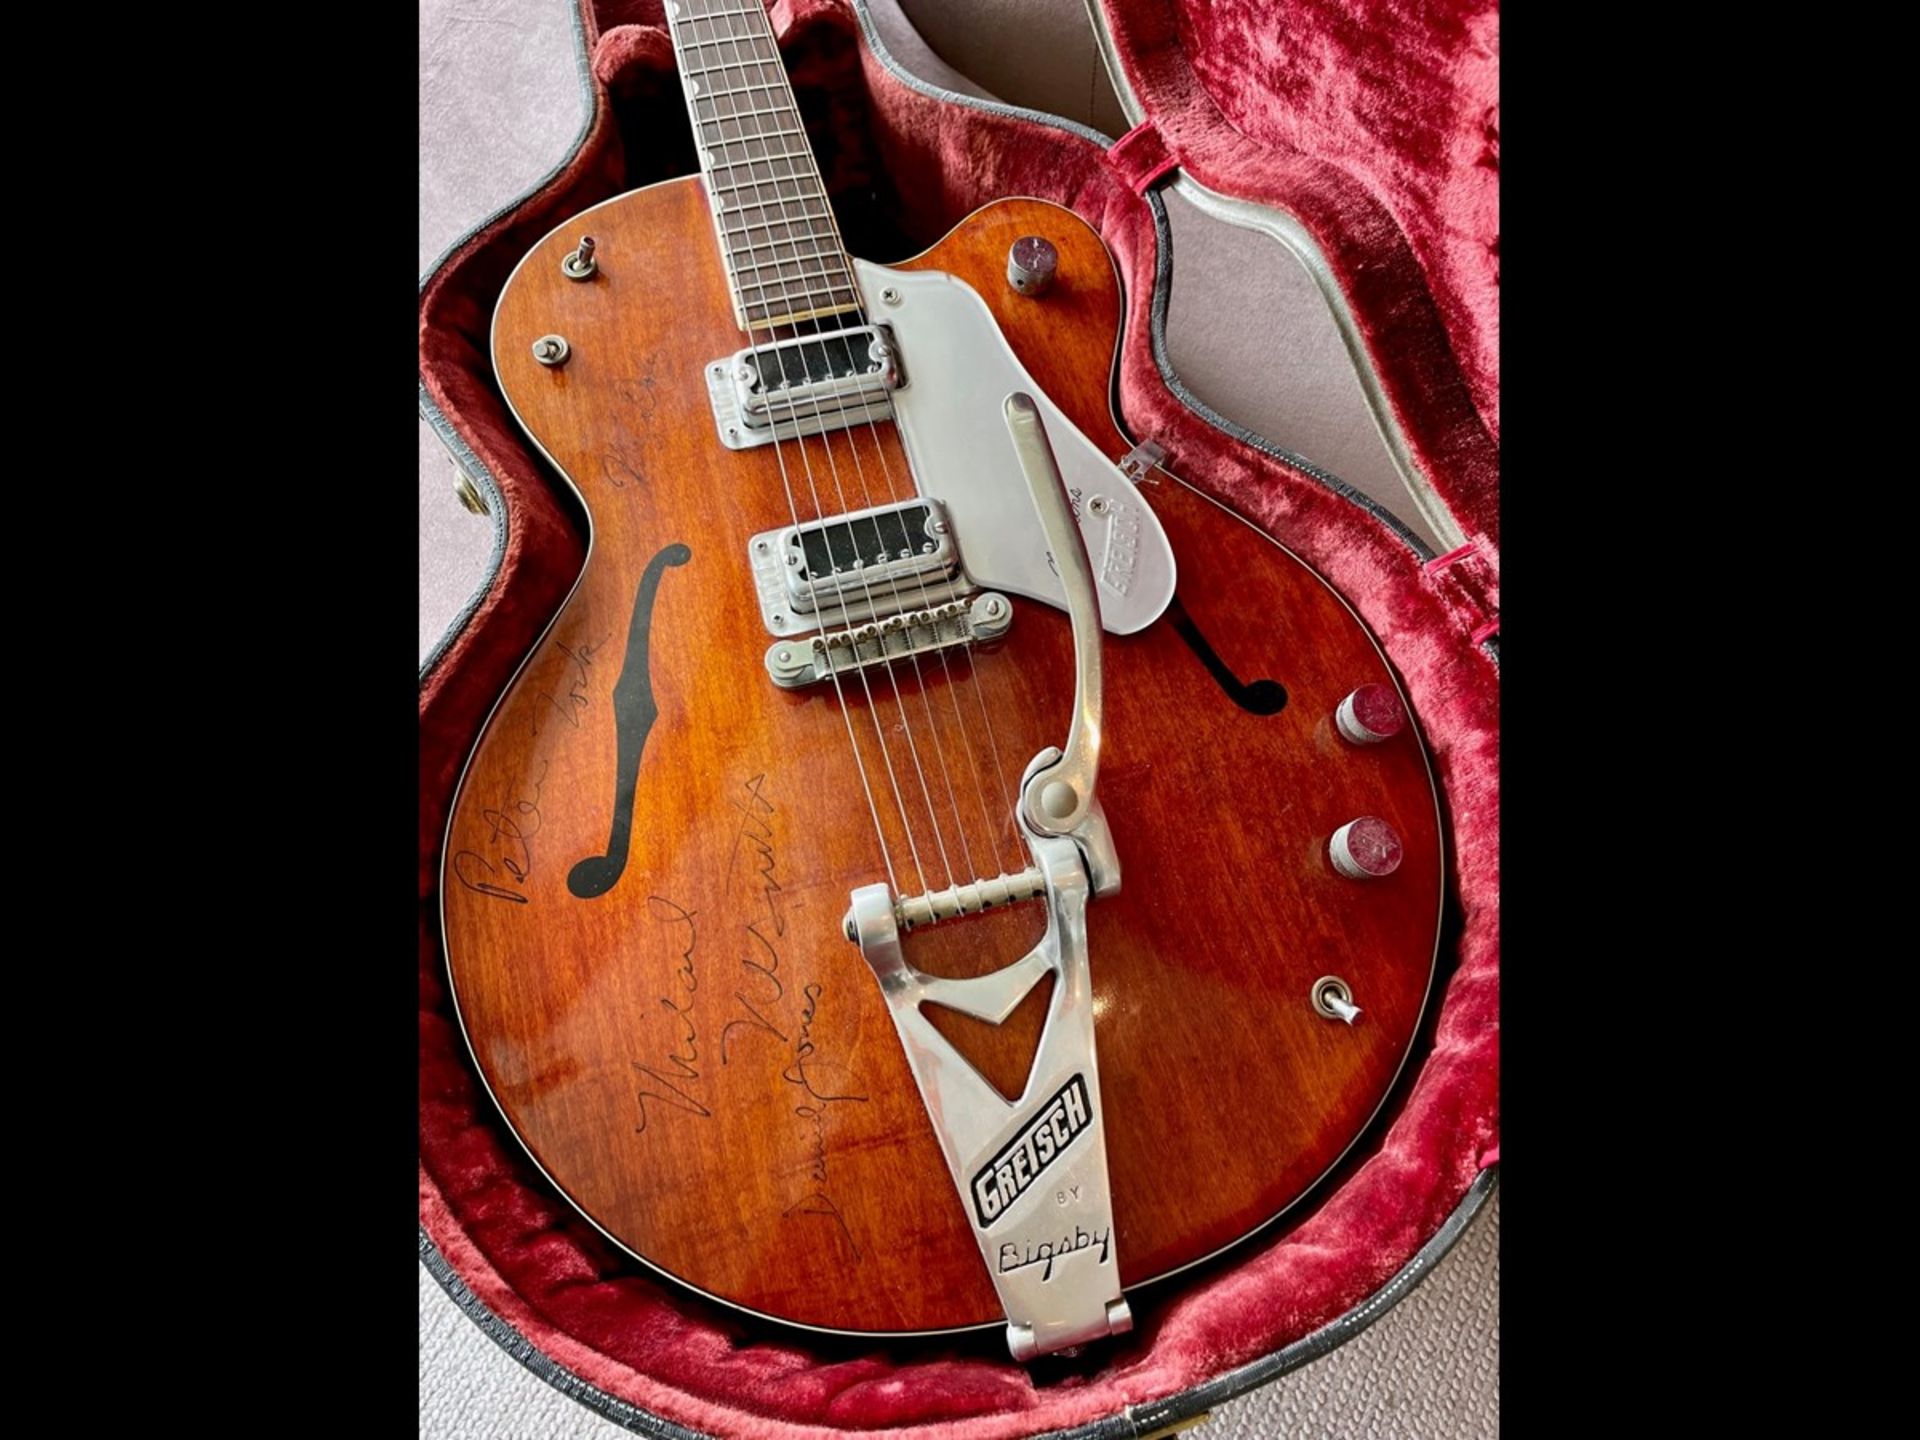 Country Gentleman Guitar by Gretsch Company - Image 4 of 5